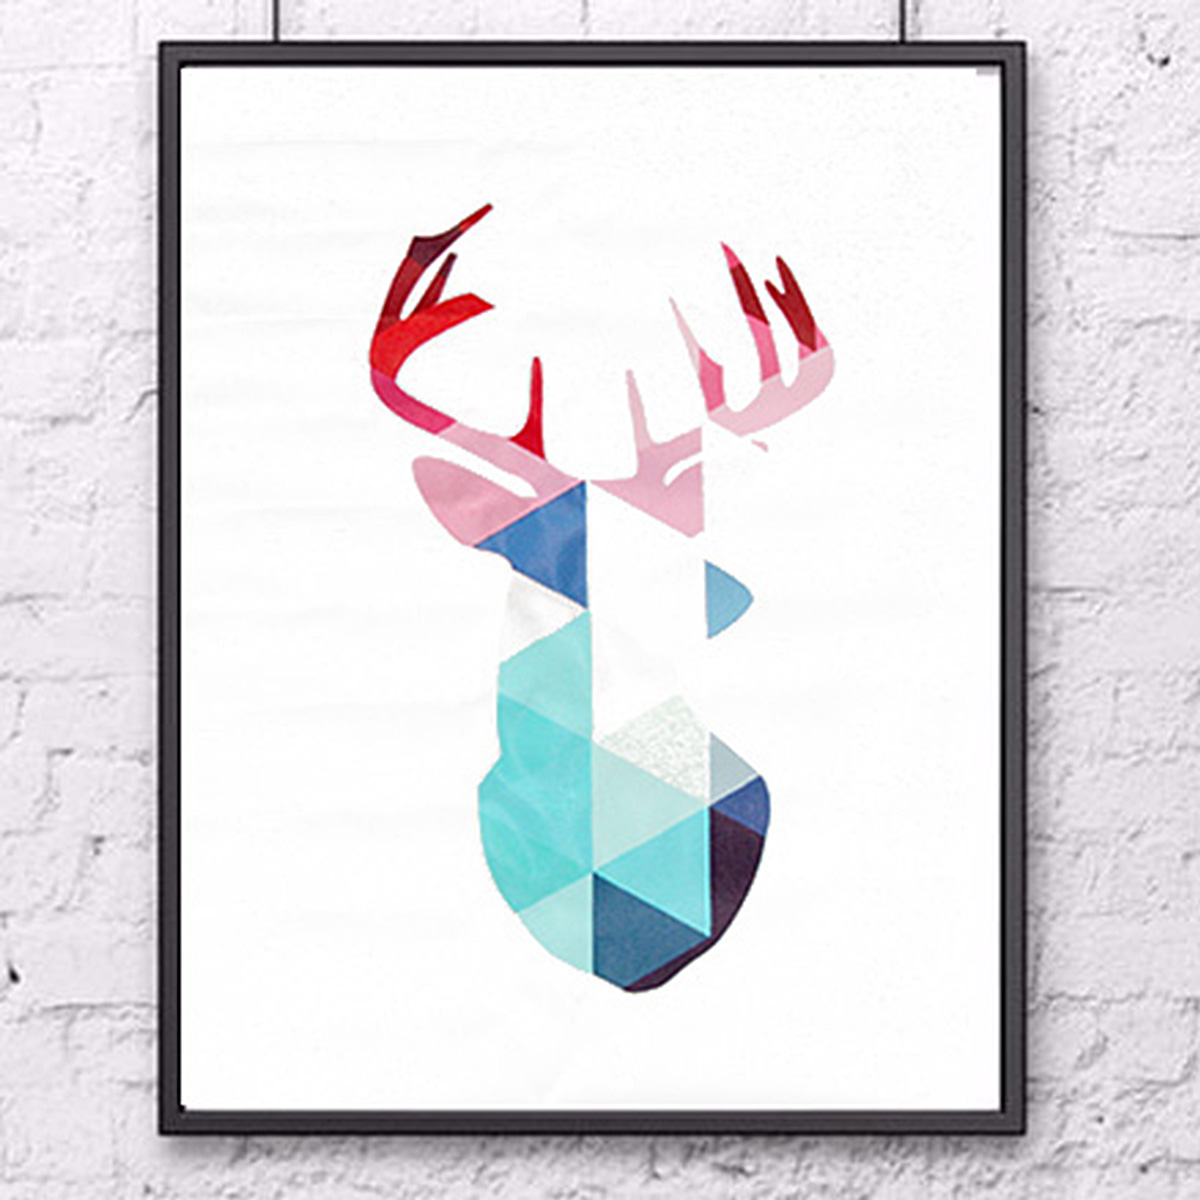 Geometric-Coral-Deer-Frameless-Canvas-Prints-Wall-Art-Picture-Home-Decoration-1082139